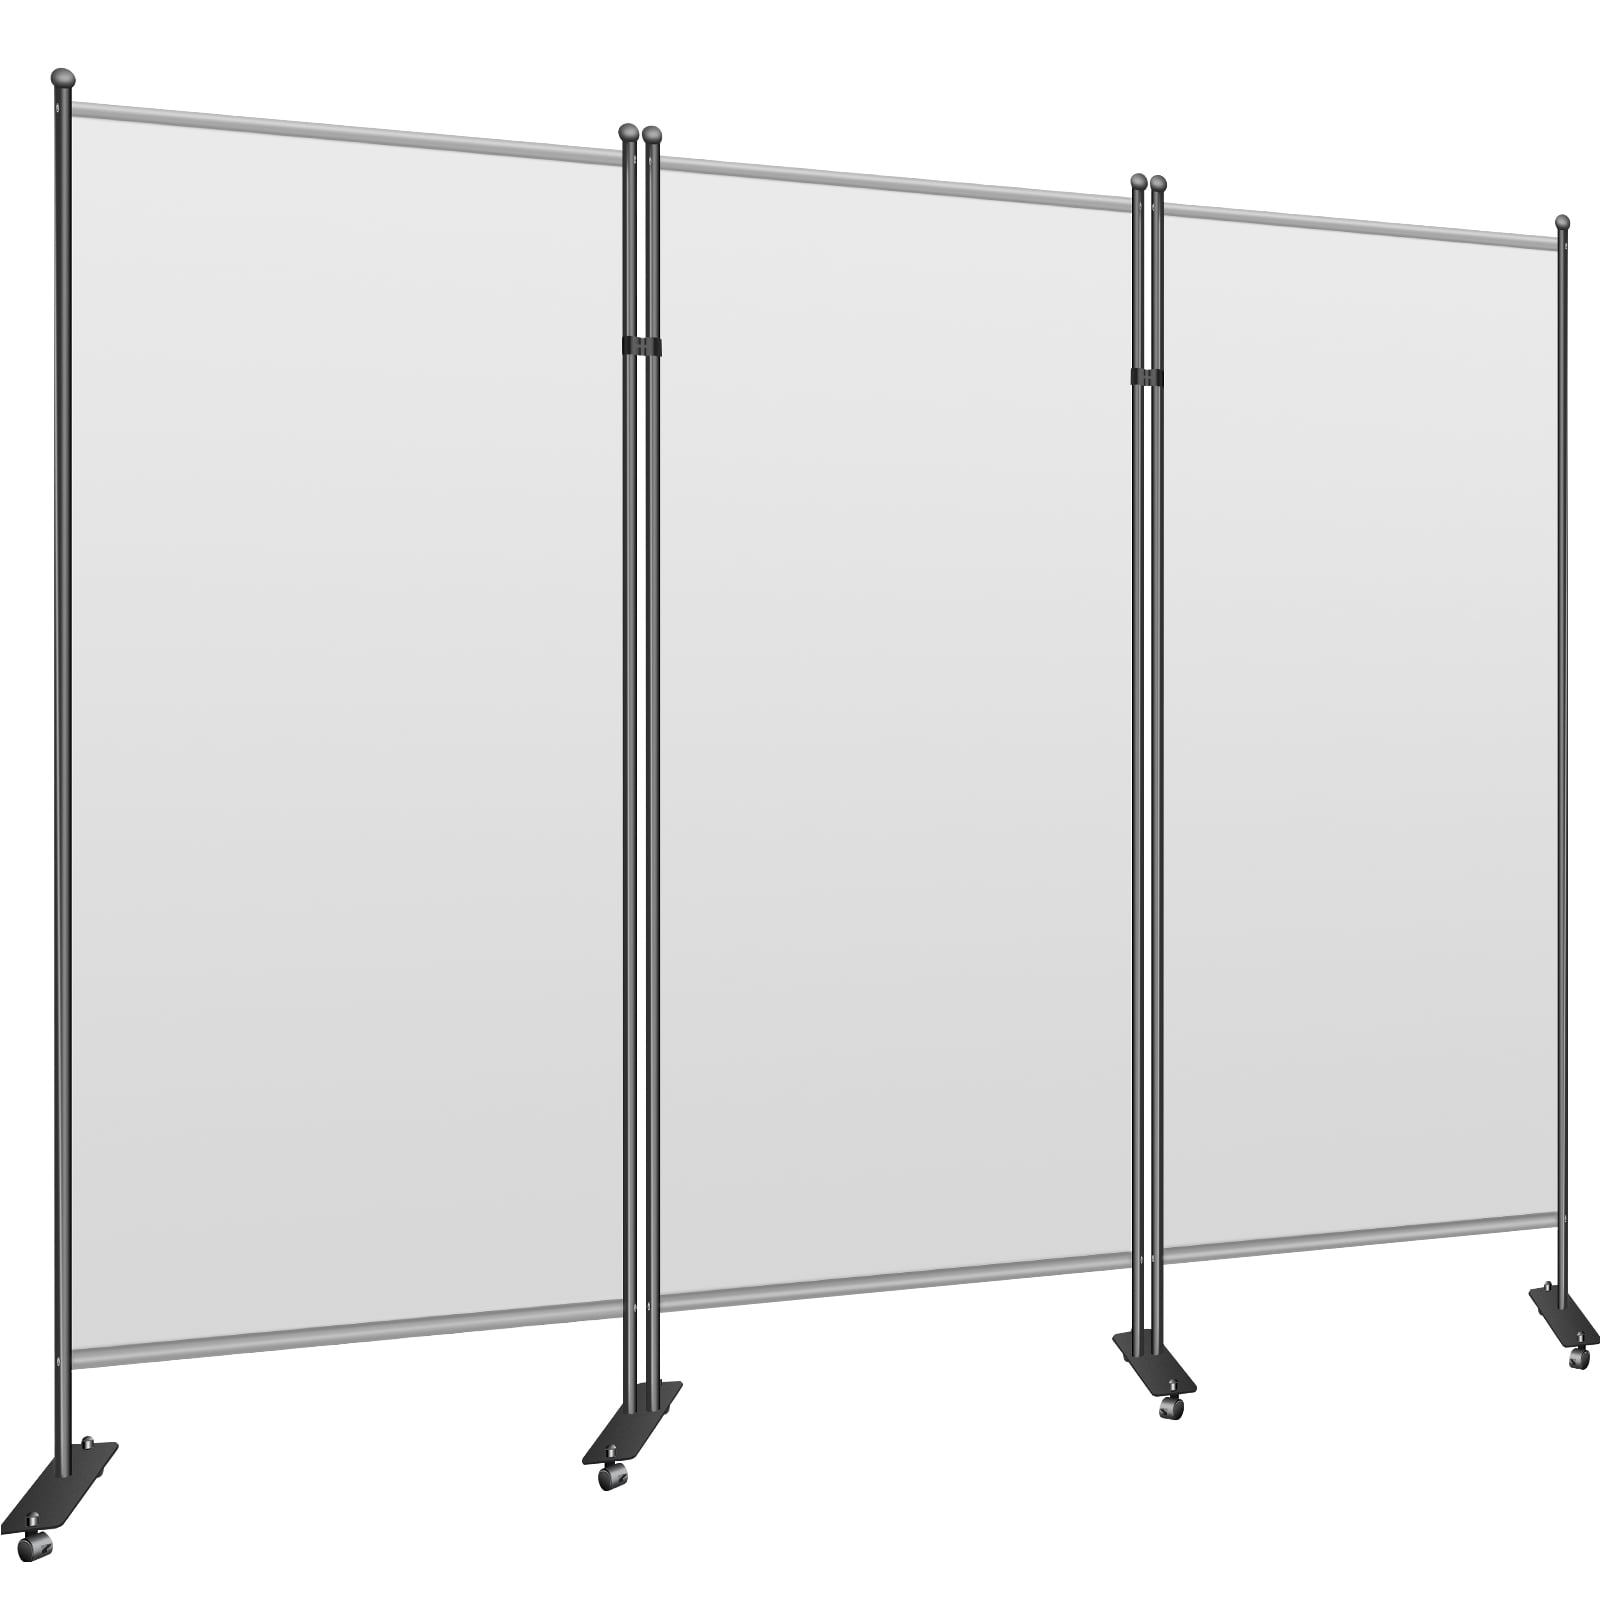 VEVORbrand 3-Panel Room Divider 6 FT Wall Office Partition 90 W x 14 D x  71 H Folding Portable Privacy Screen with Non-See-Through Fabric Room